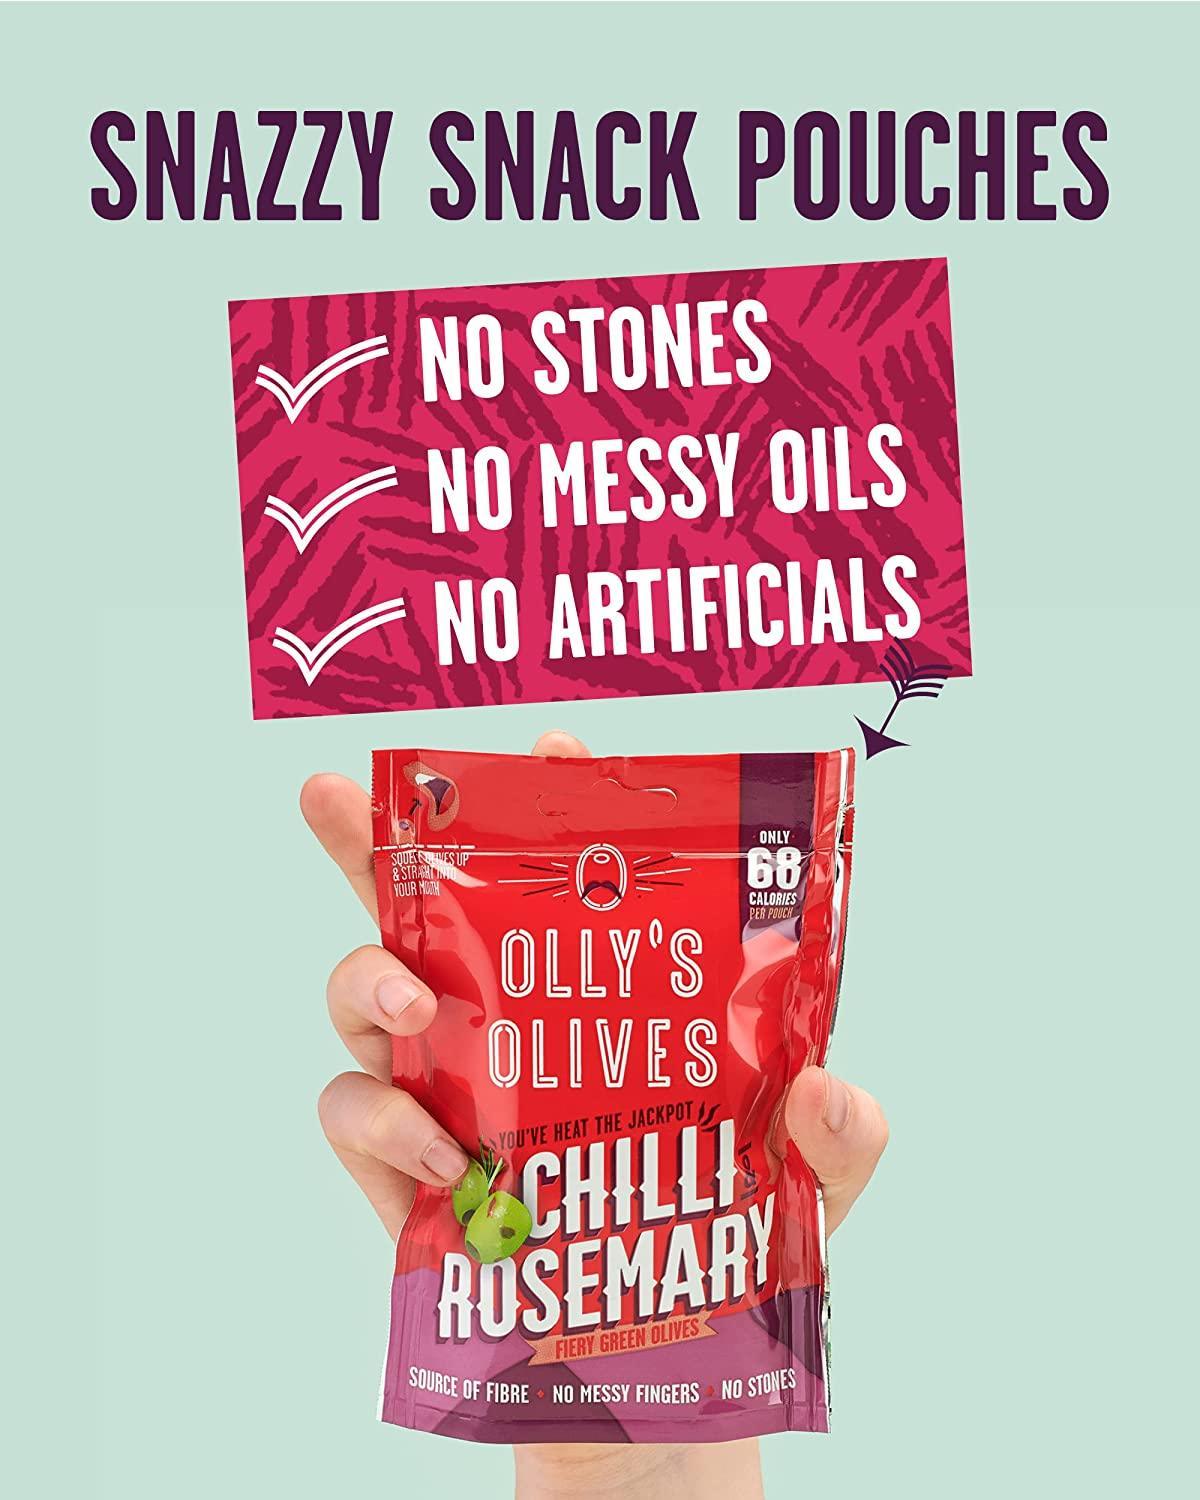 Olly's Chilli & Rosemary Olives - 12 x 50g Pouches - Vending Superstore